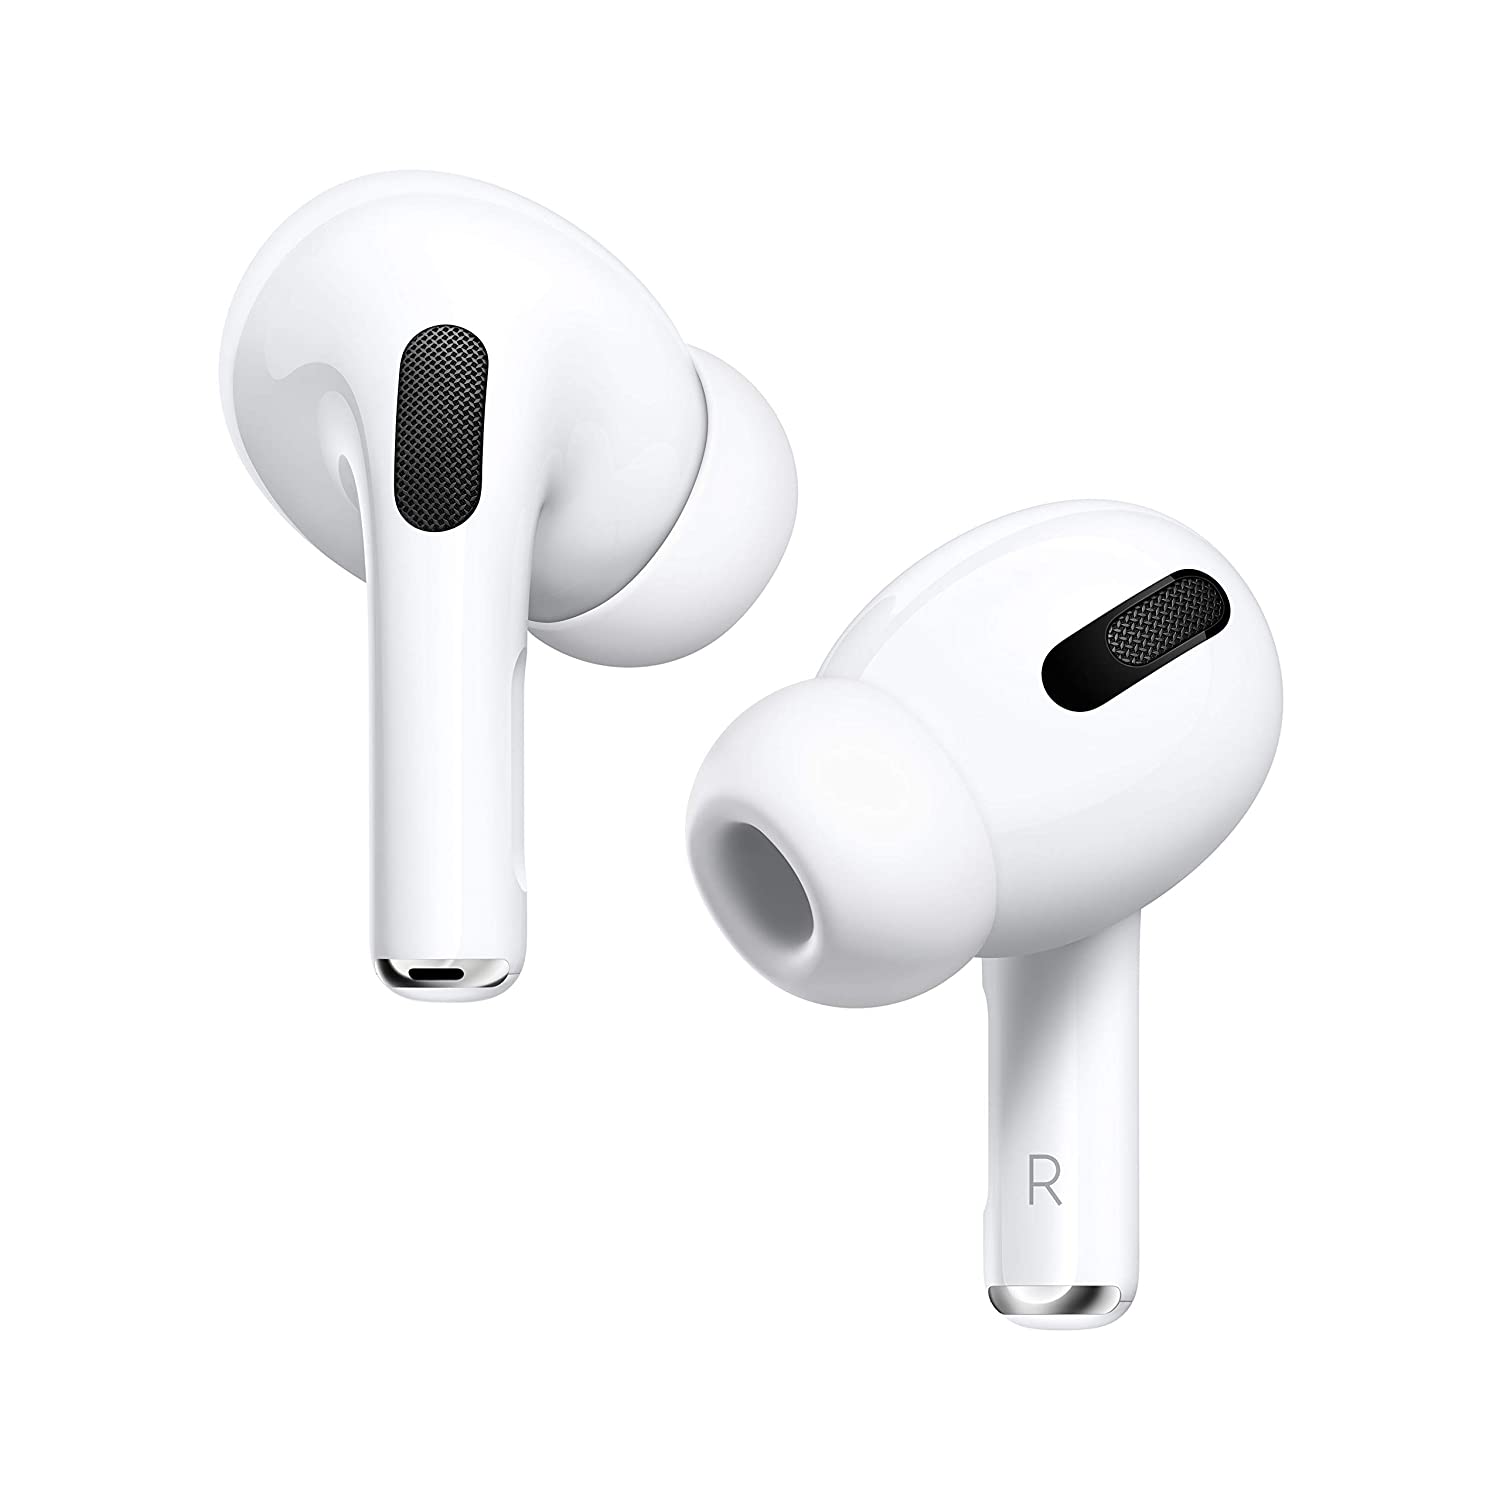 The actual Apple AirPods pro earbuds